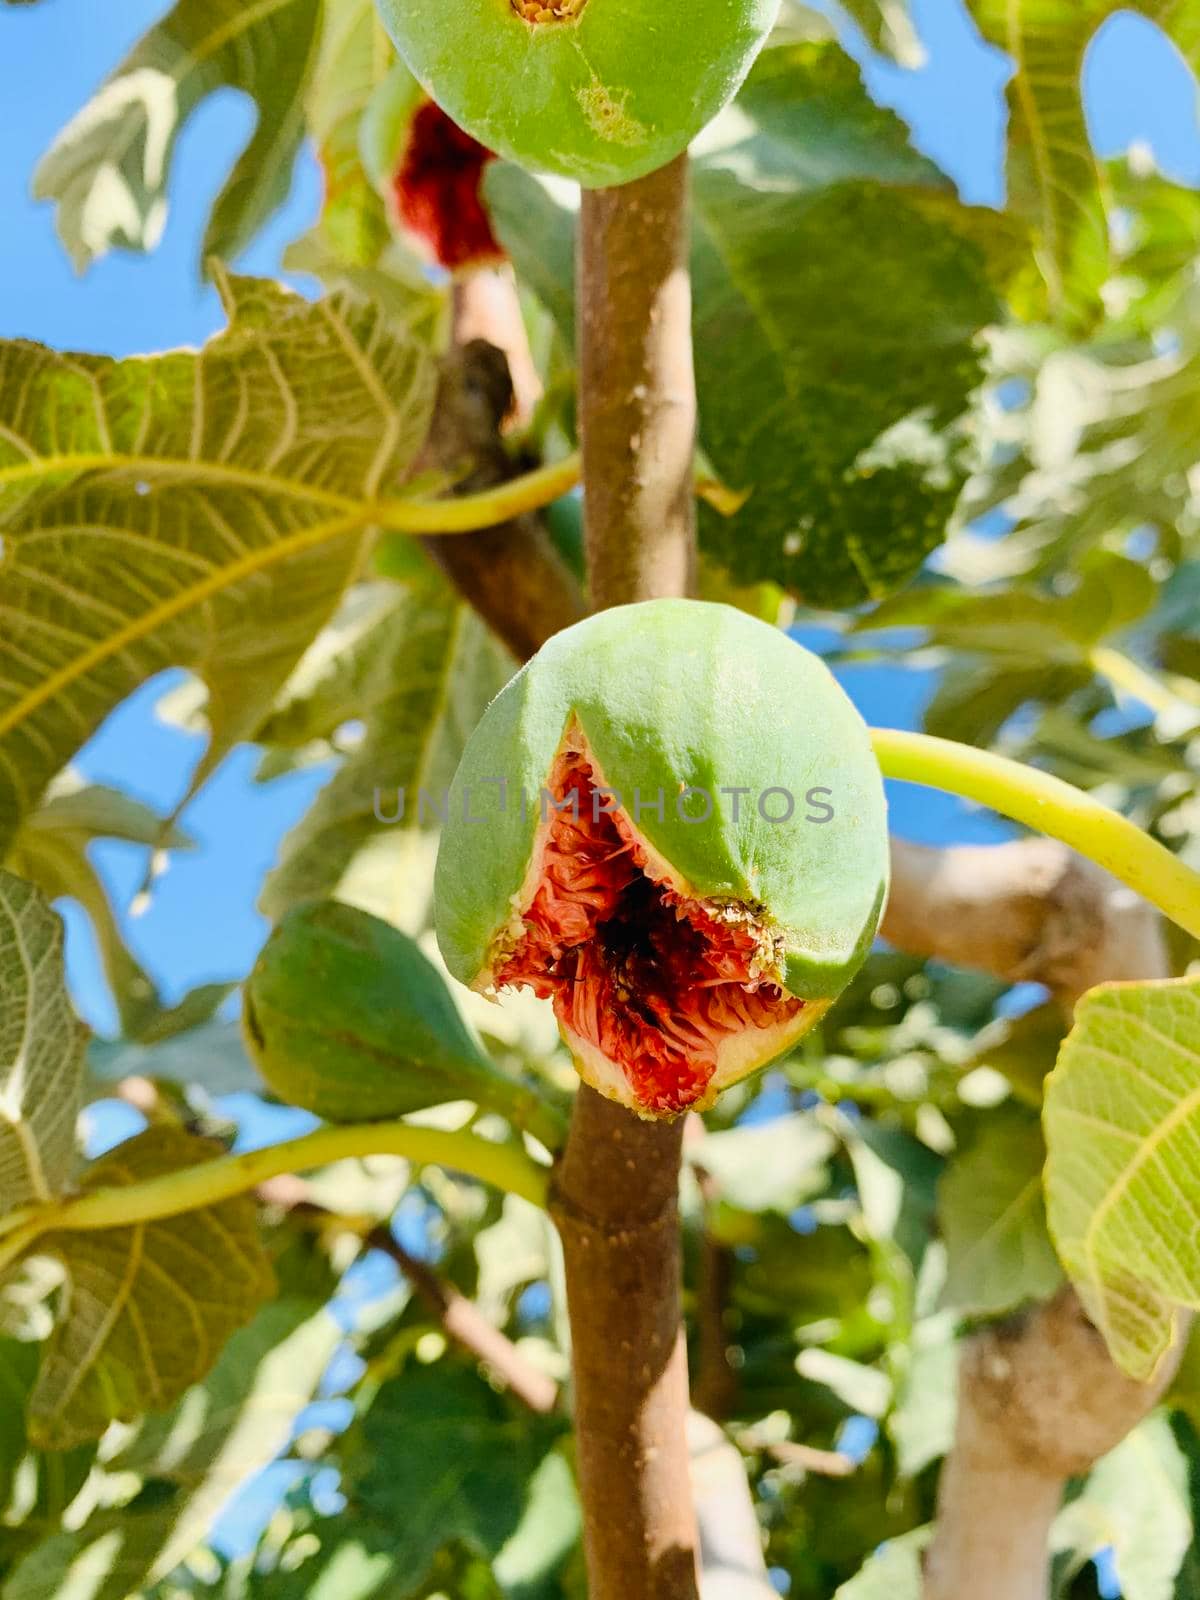 Rape fig fruits growing on a branch tree